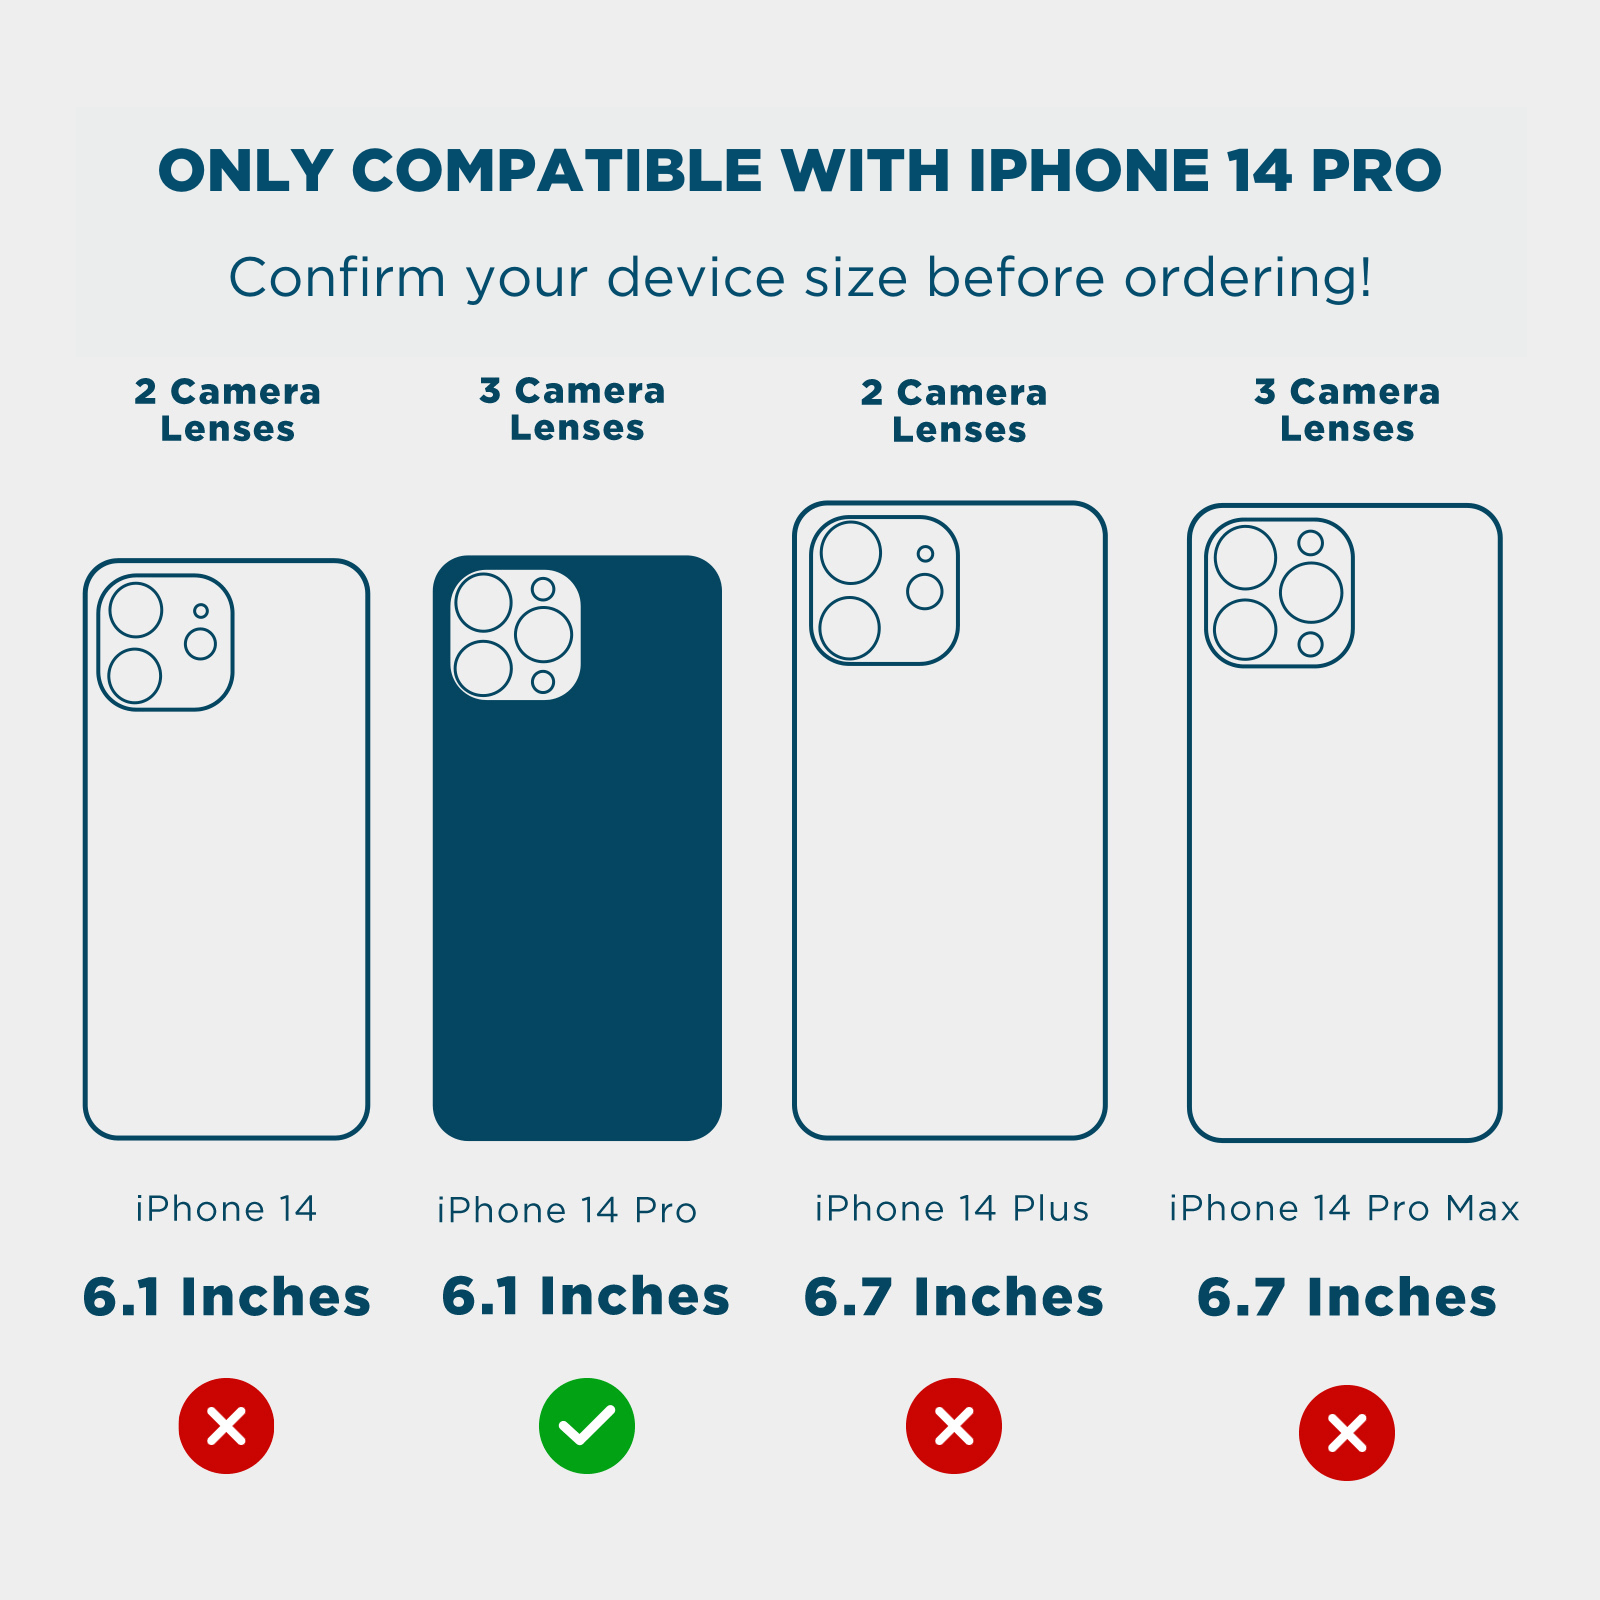 ONLY COMPATIBLE WITH IPHONE 14 PRO. CONFIRM YOUR DEVICE SIZE BEFORE ORDERING. 2 CAMERA LENSES, 3 CAMERA LENSES, 2 CAMERA LENSES, 3 CAMERA LENSES, 6.1, 6.1, 6.7, 6.7. COLOR::BLACK